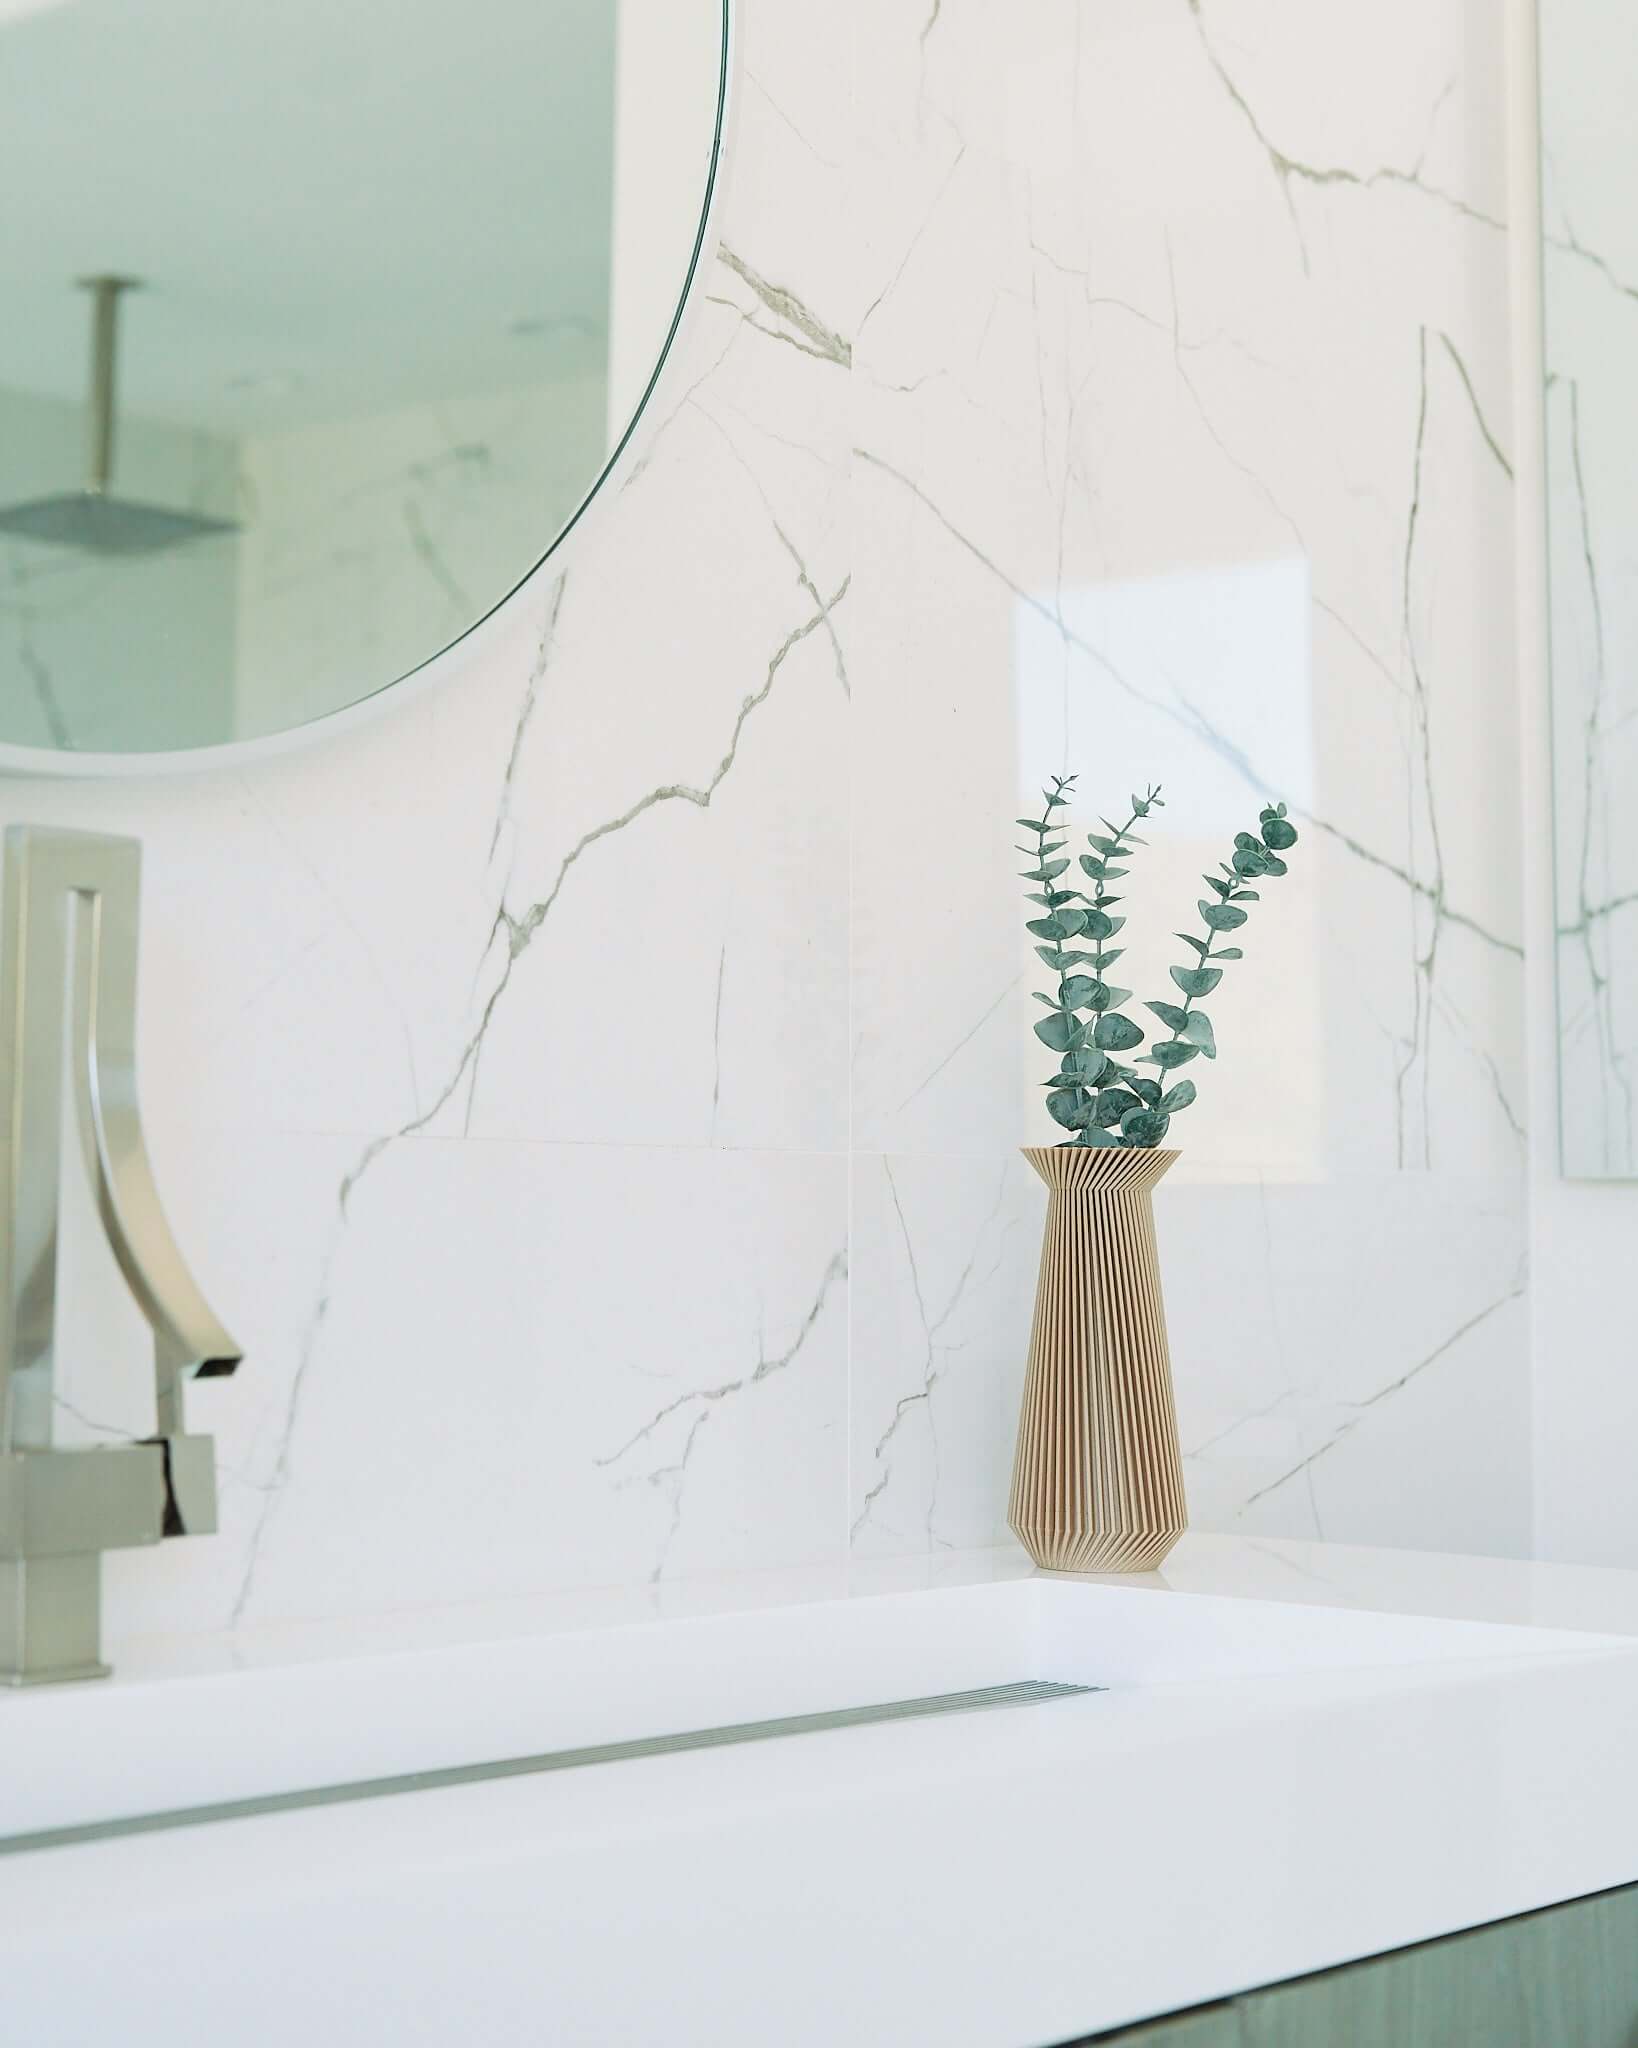 A cream vase with eucalyptus by Woodland Pulse. This is a modernist vase on a bathroom sink marble countertop.